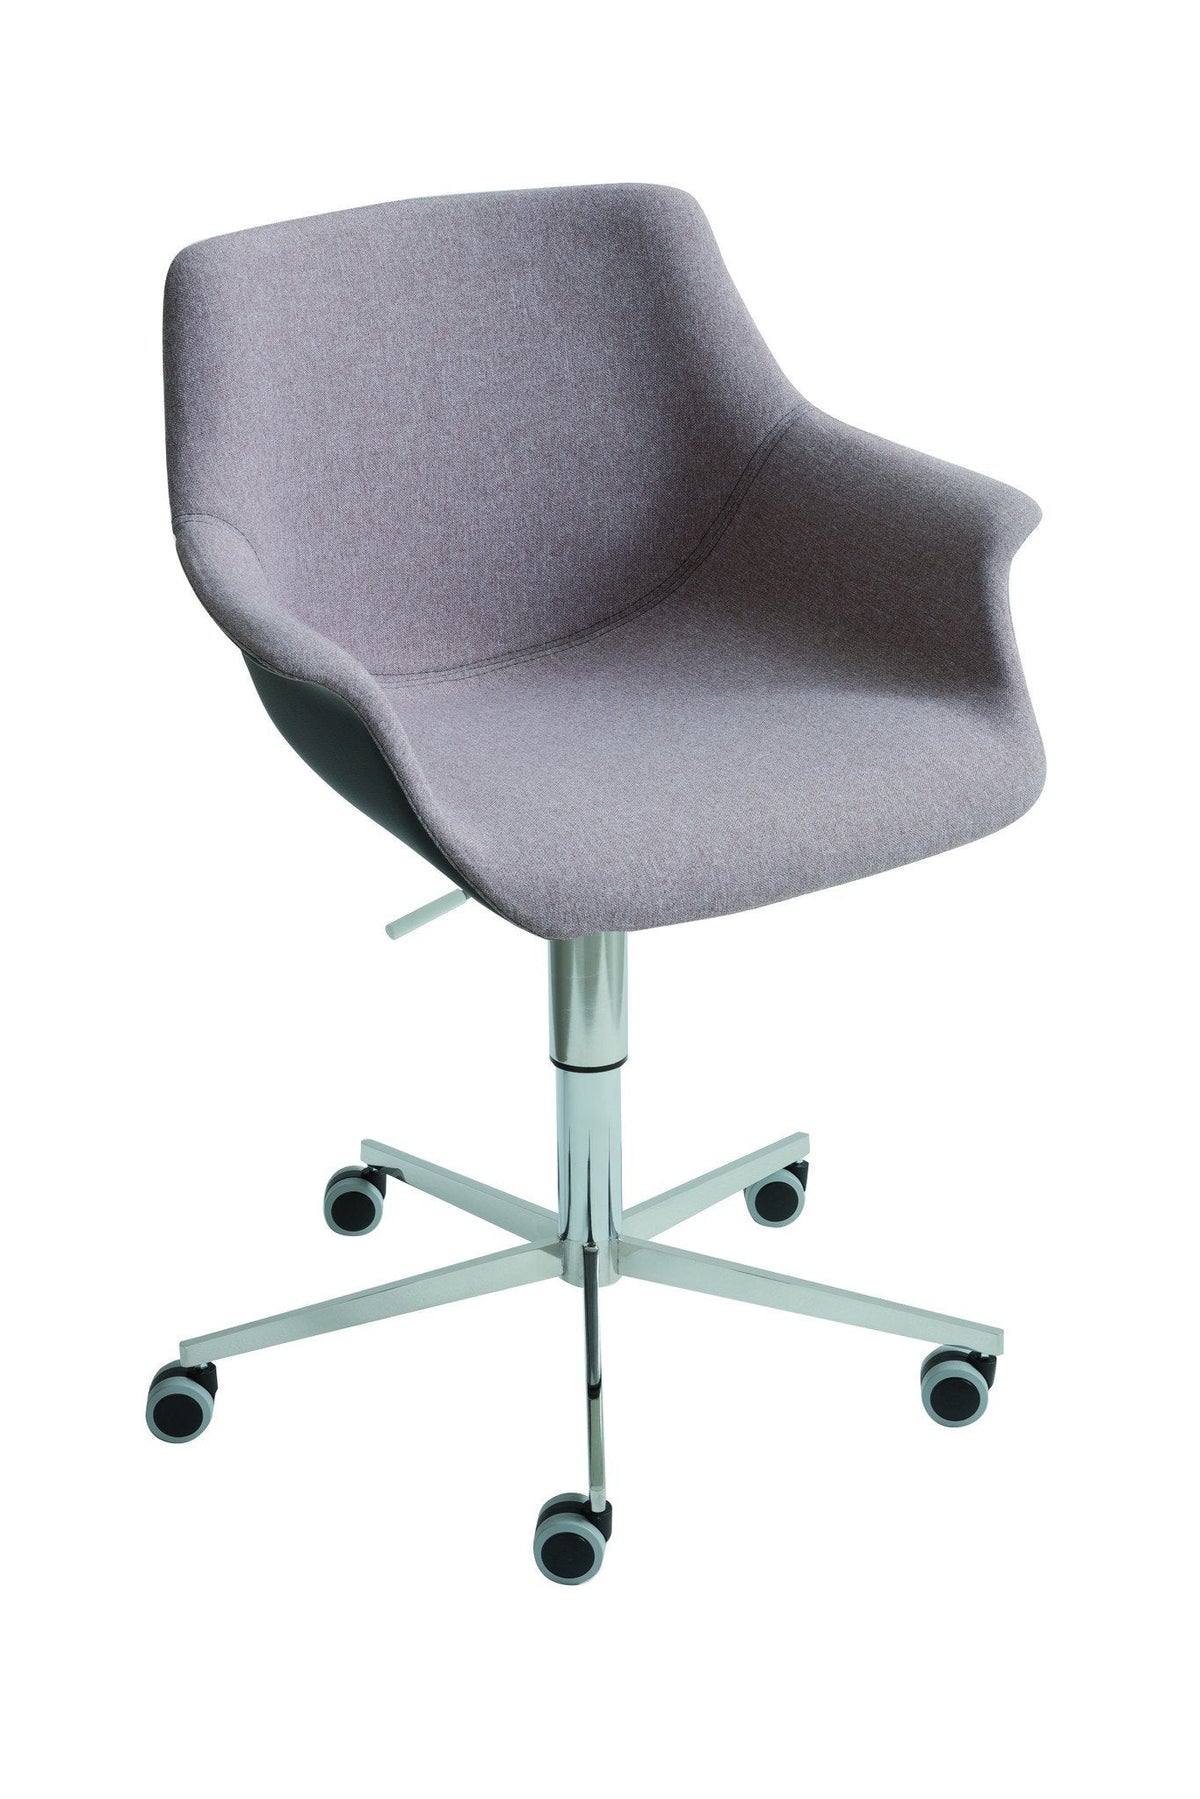 More Side Chair c/w Wheels-Gaber-Contract Furniture Store